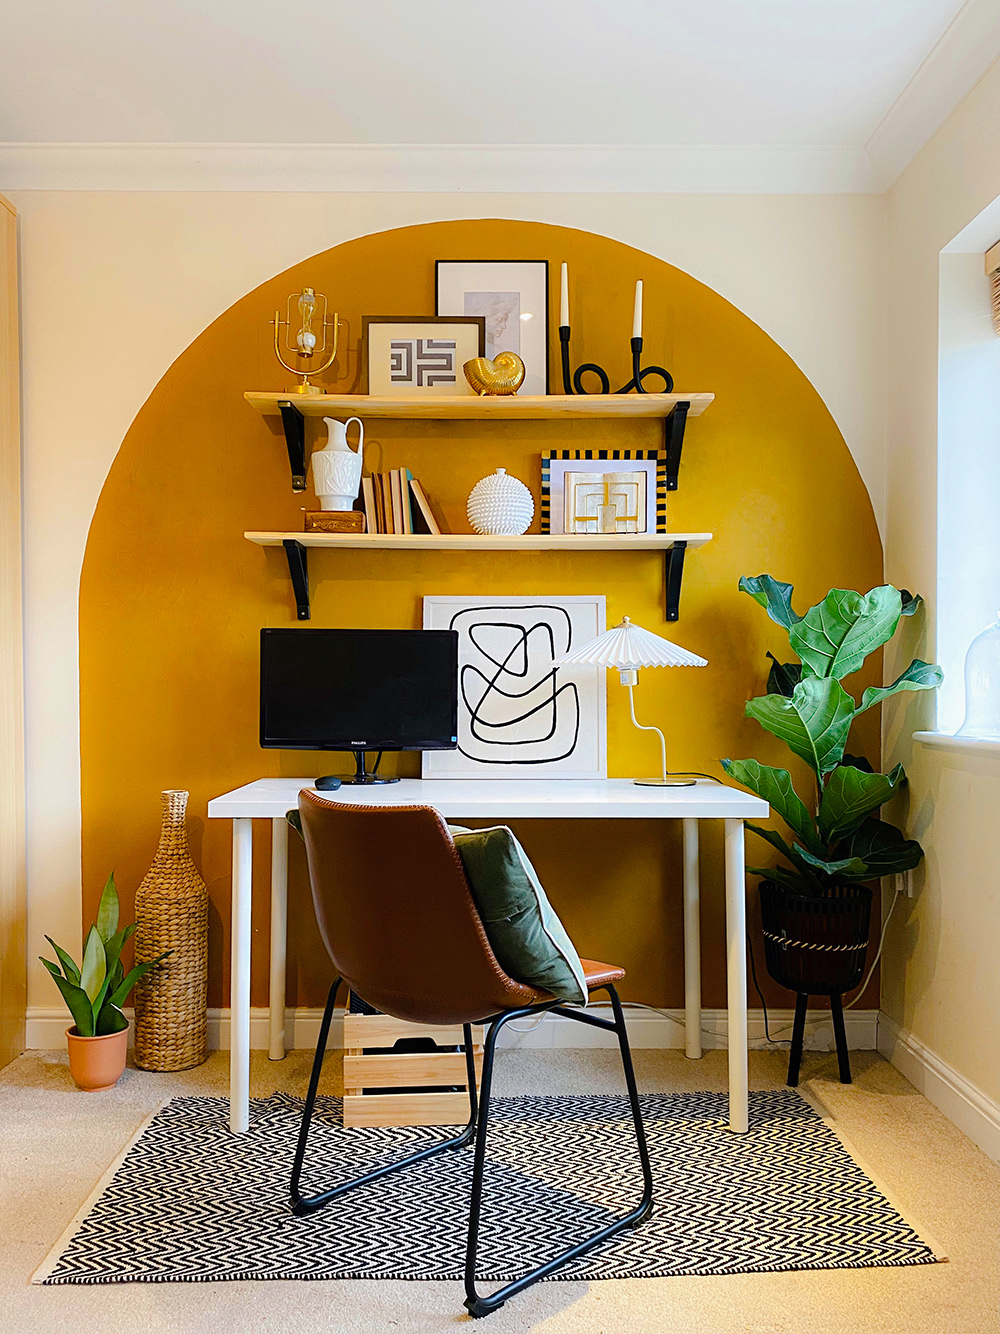 Home office decor with an unusual painted wall arch in mustard yellow. Renter friendly - painted over self-adhesive clear vinyl